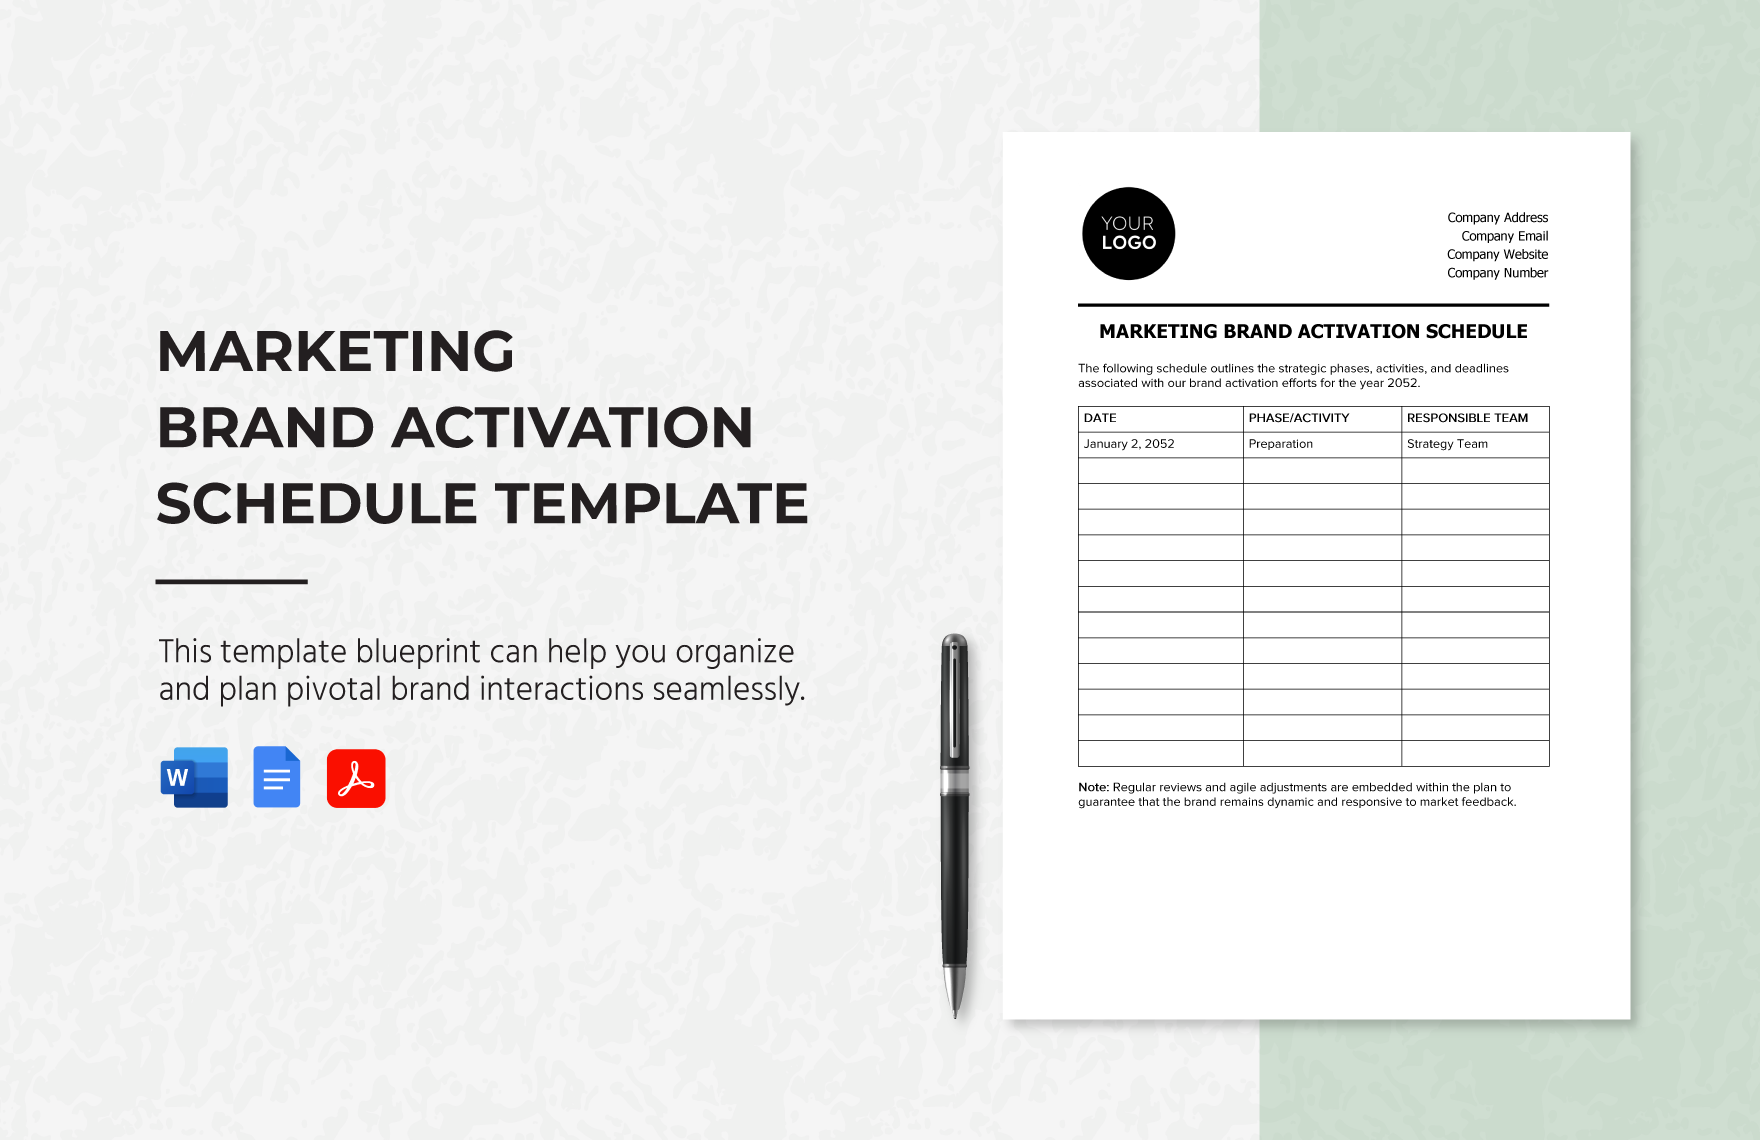 Marketing Brand Activation Schedule Template in Word, Google Docs, PDF